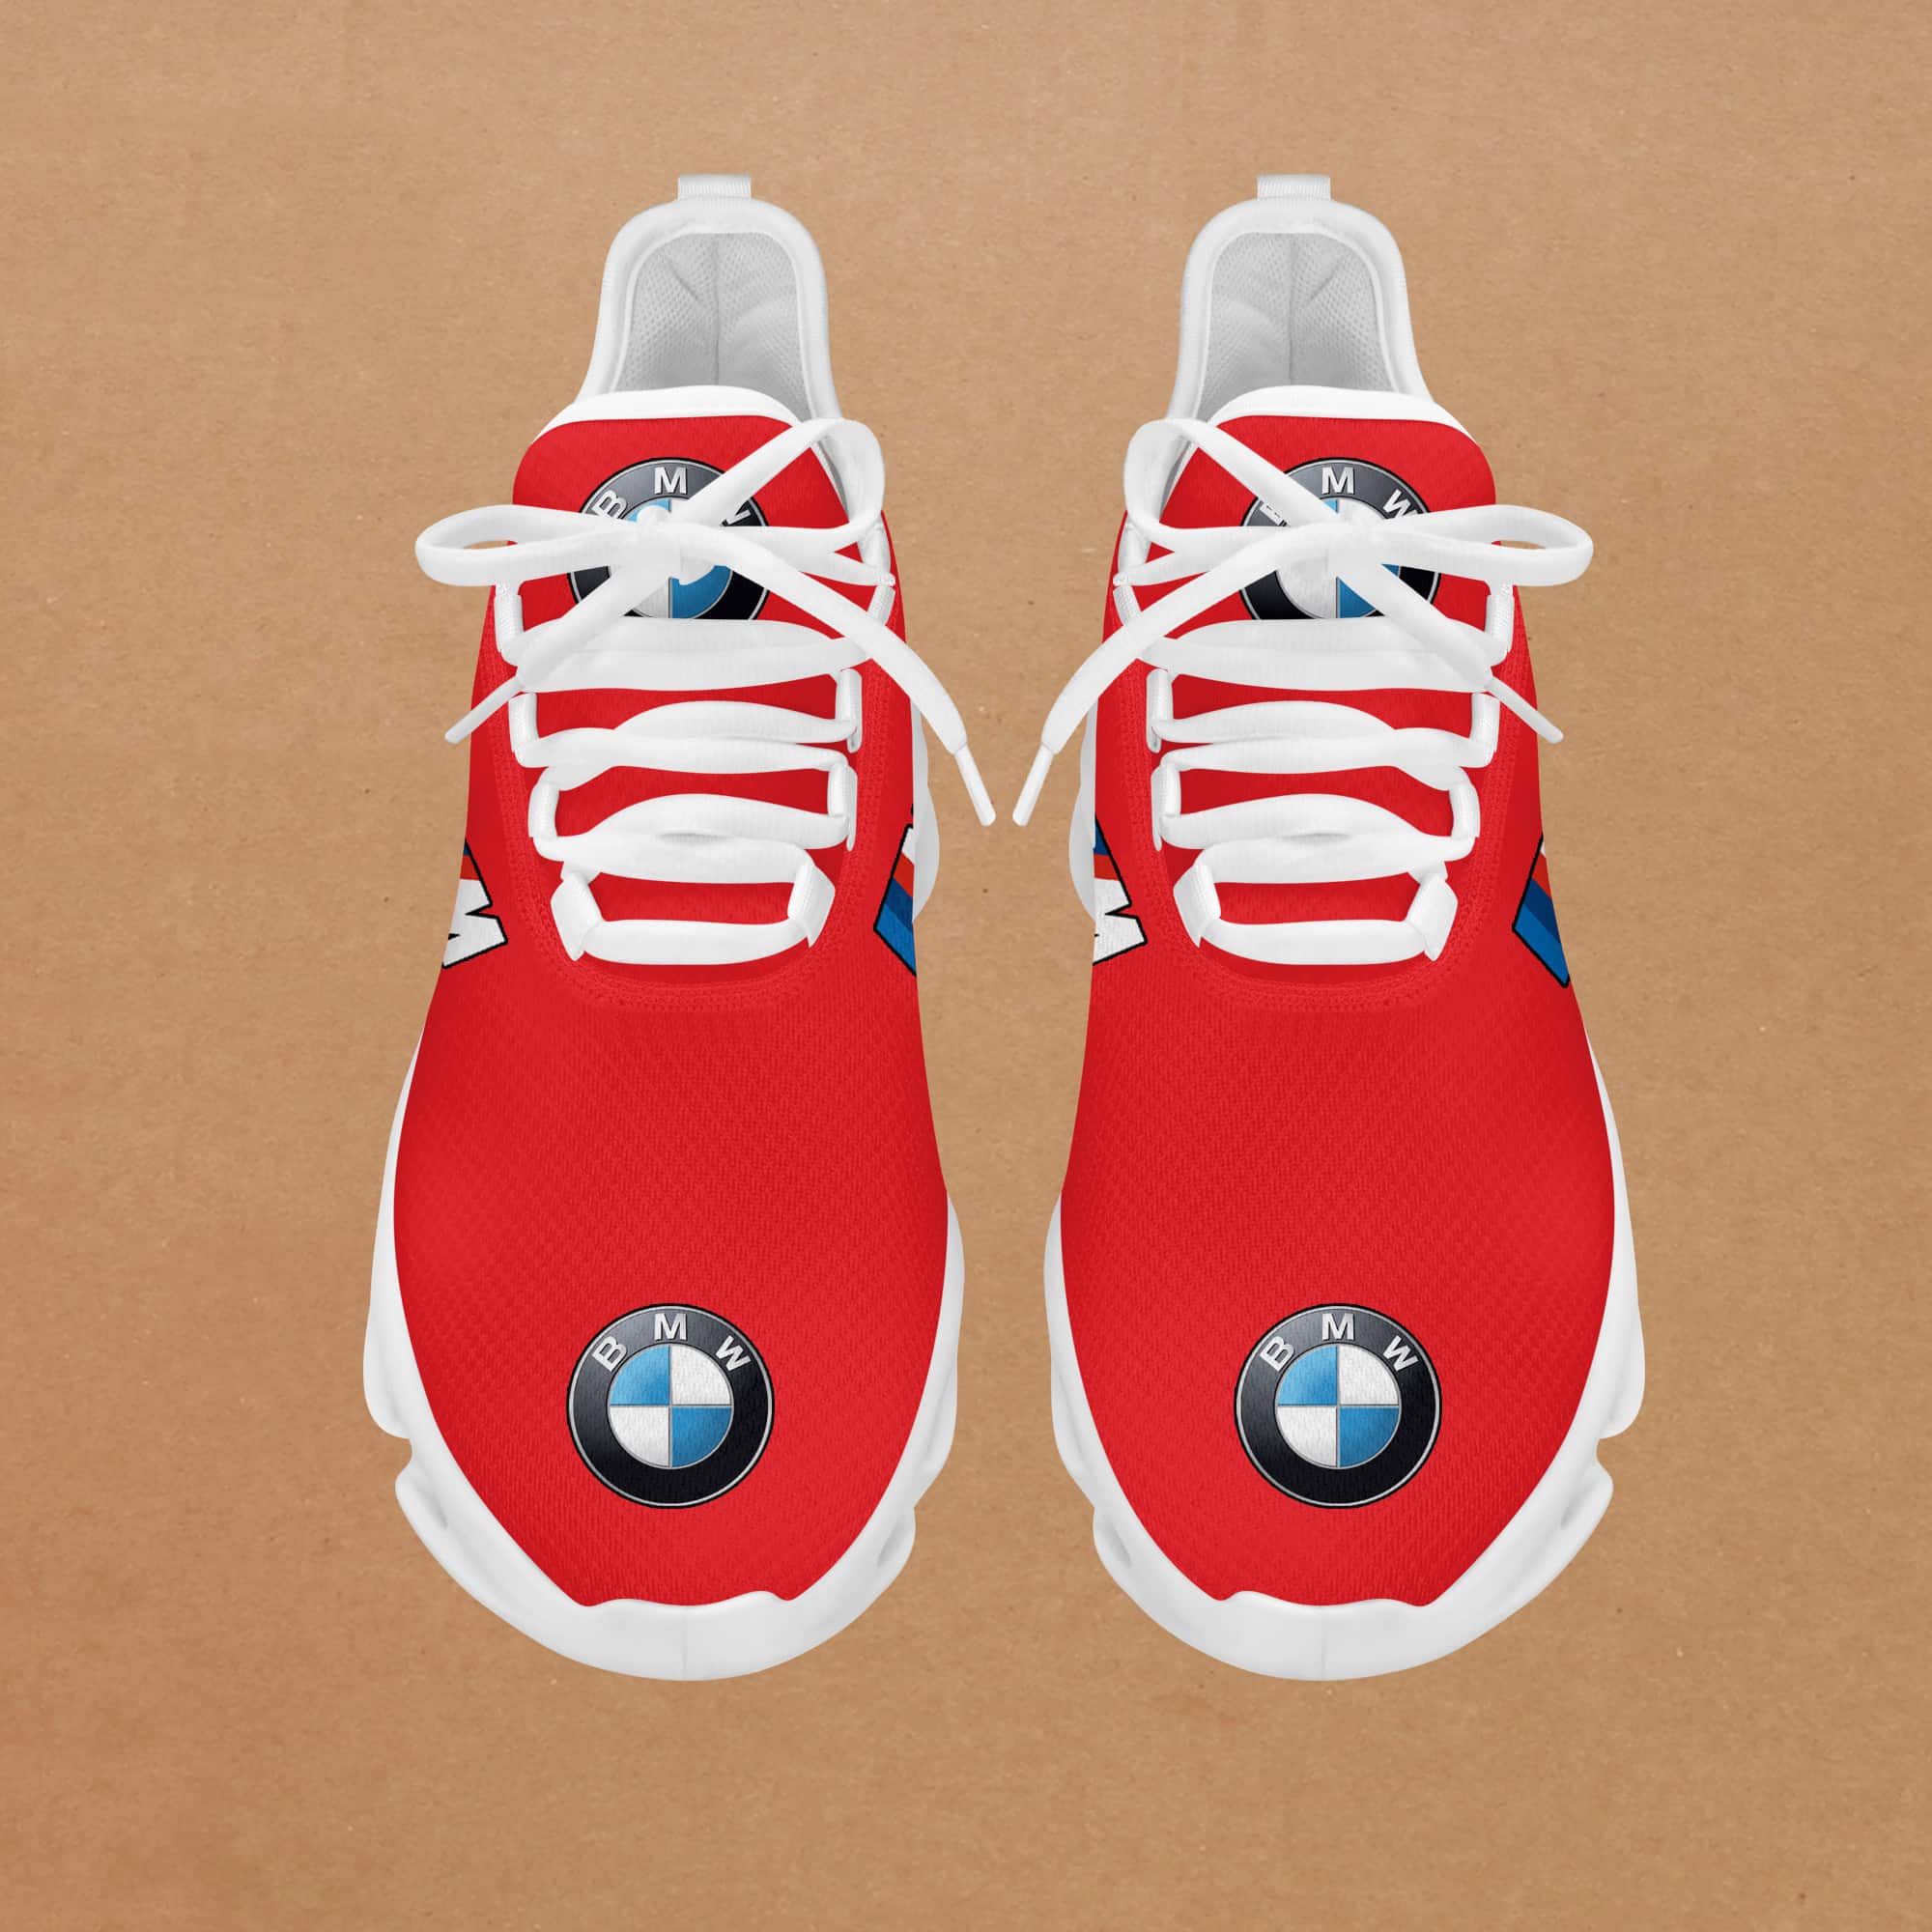 Bmw M Running Shoes Max Soul Shoes Sneakers Ver 5 3